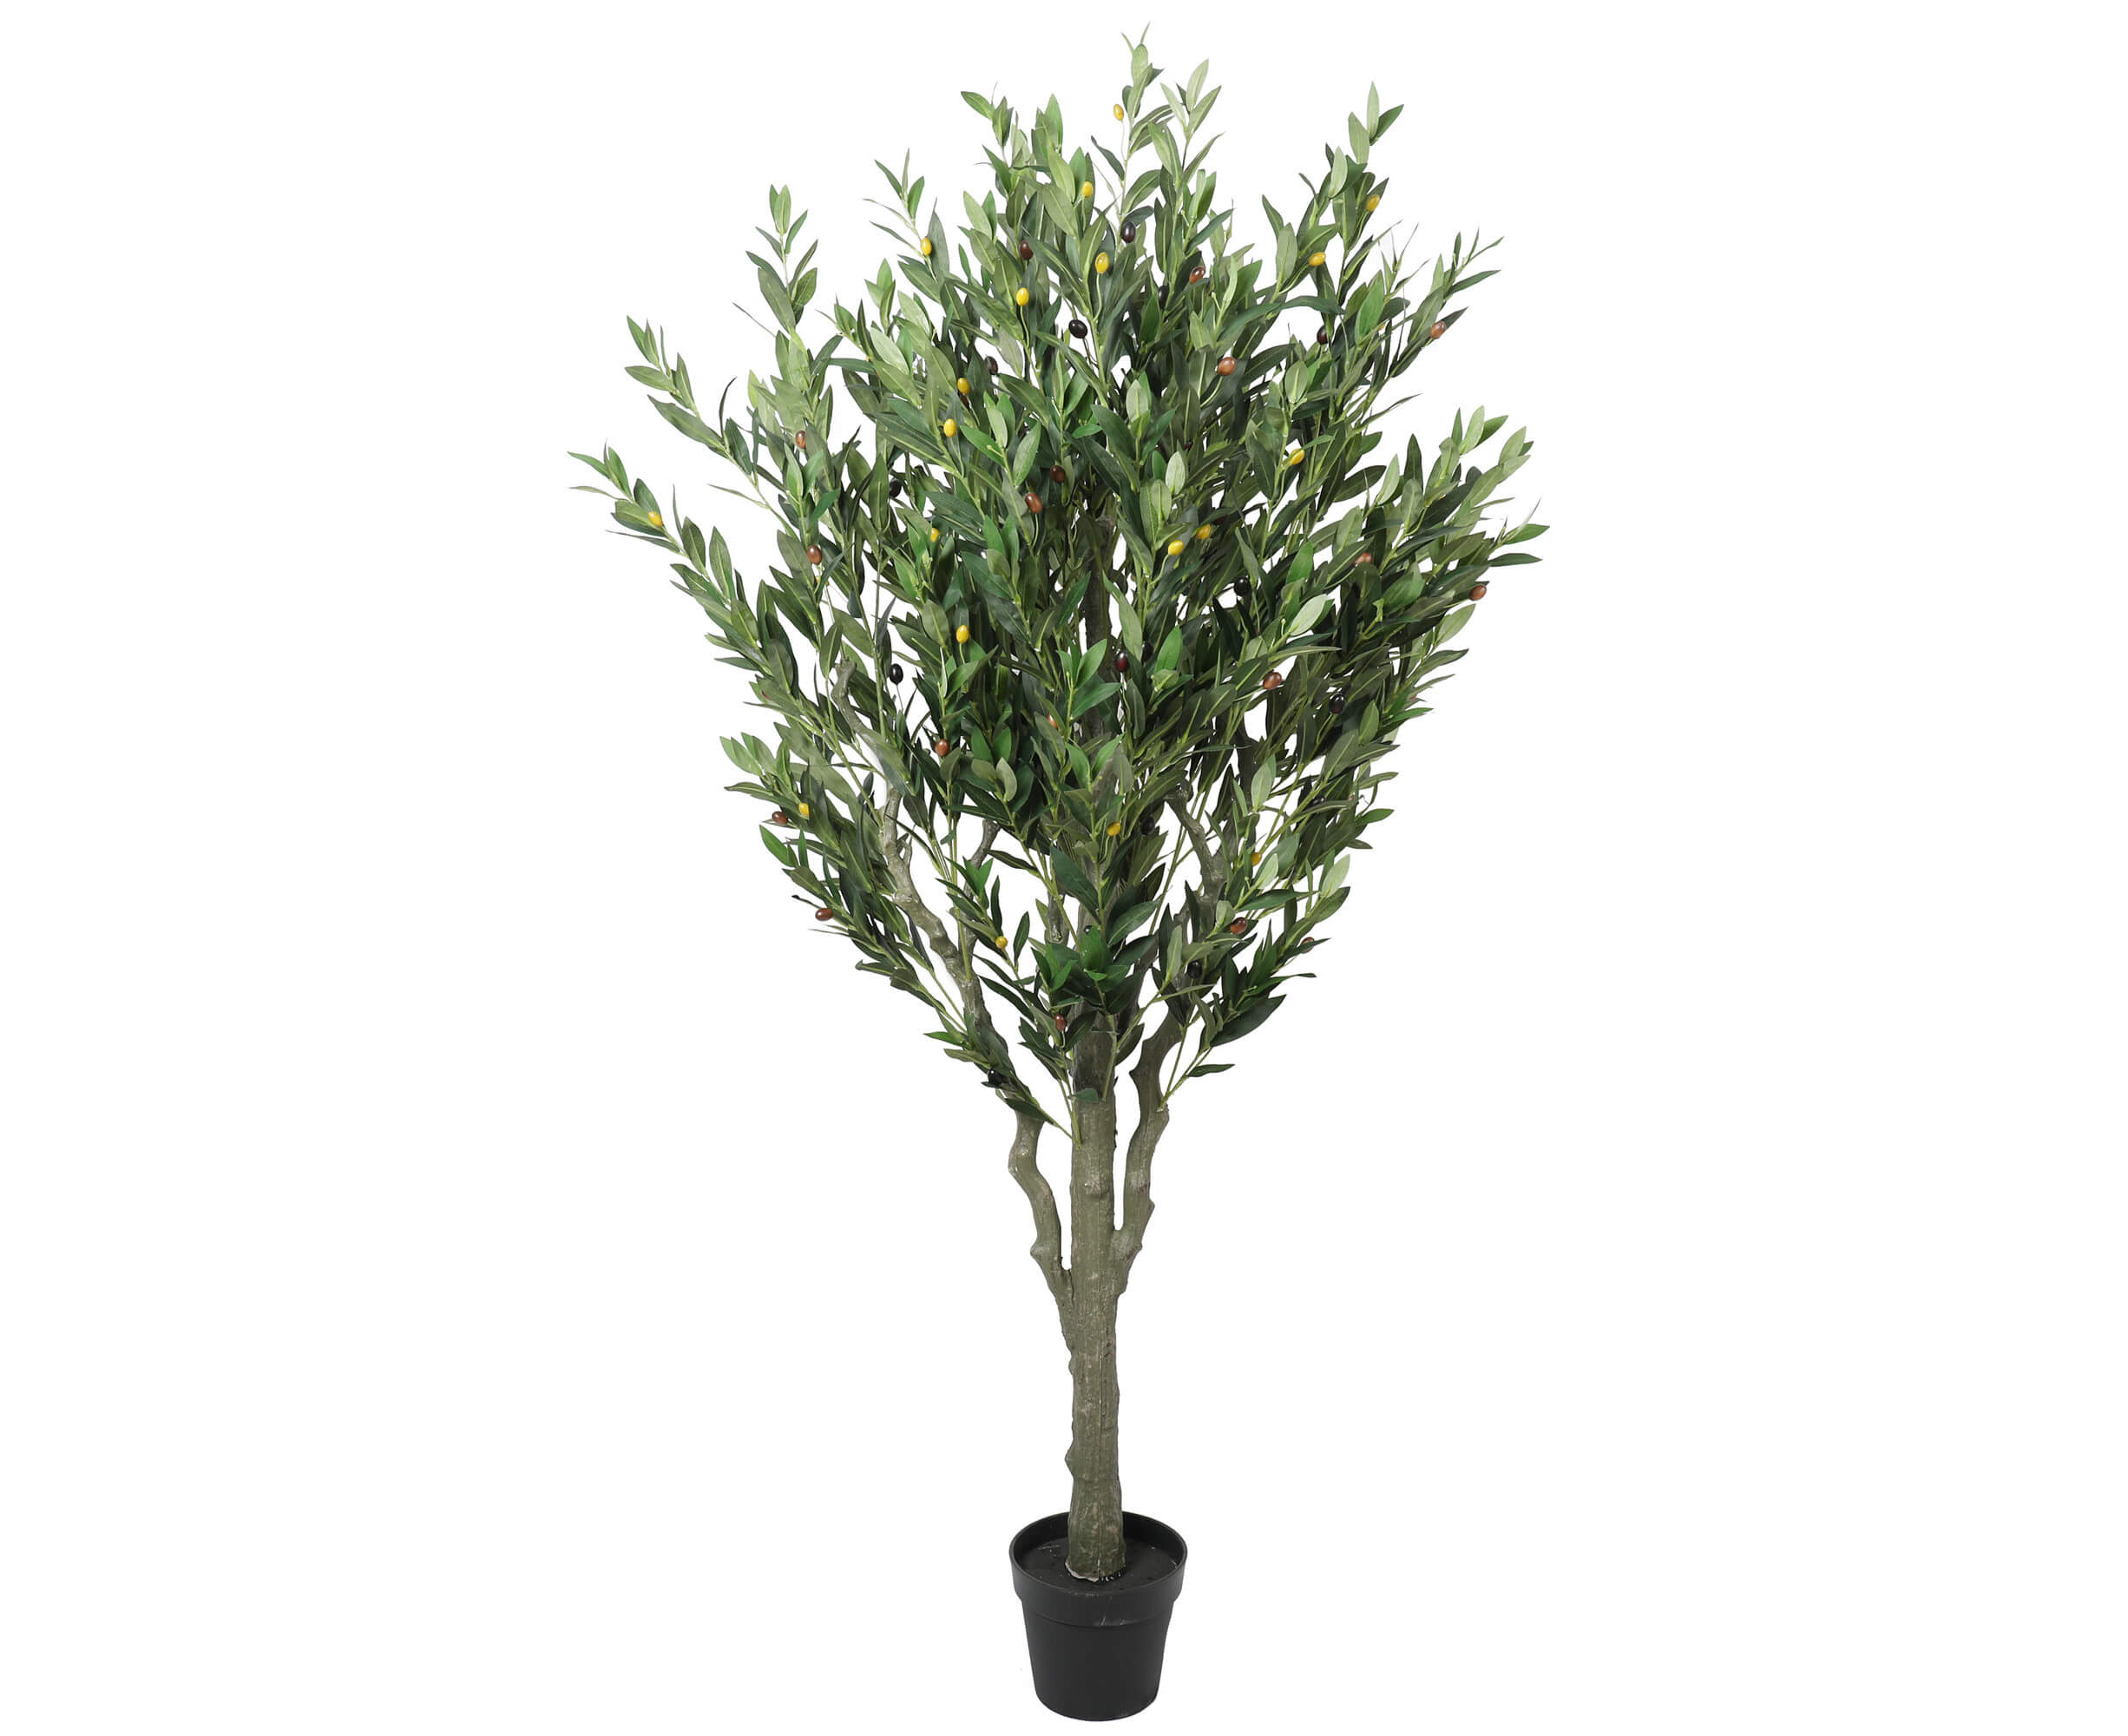  Kazeila Artificial Olive Tree 6FT Tall Faux Silk Plant for Home  Office Decor Indoor Fake Potted Tree with Natural Wood Trunk and Lifelike  Fruits : Home & Kitchen